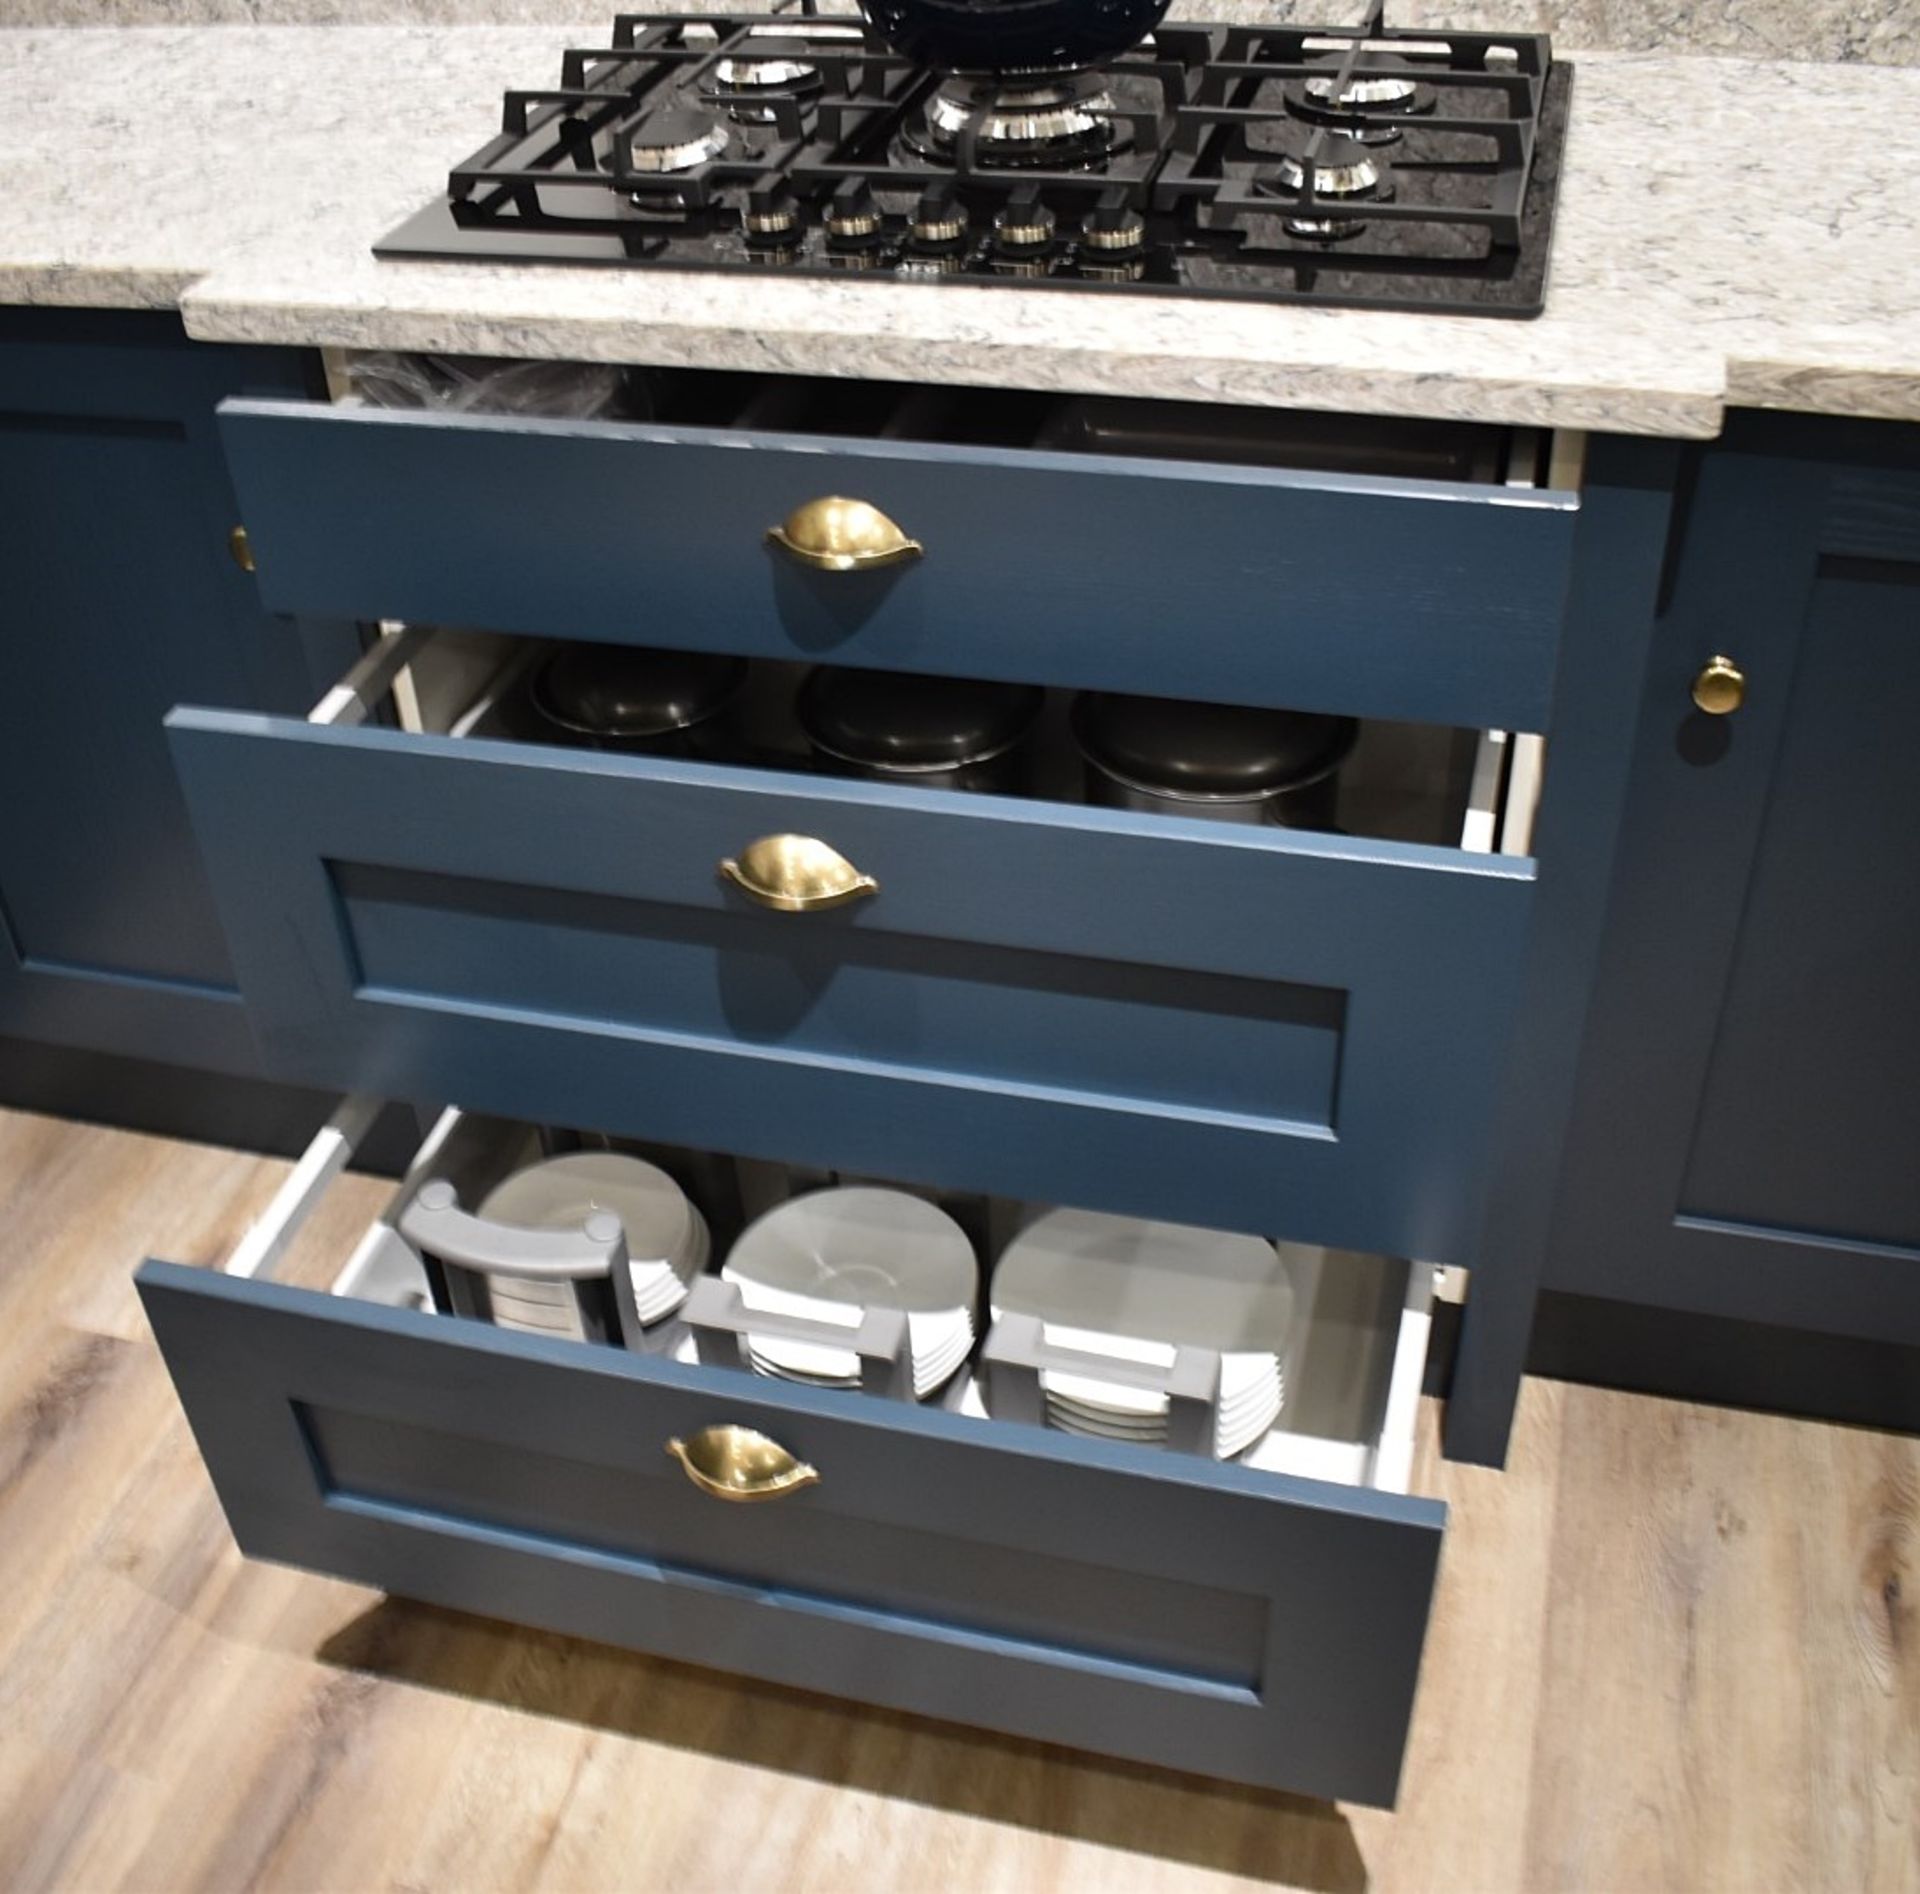 1 x 'Mornington' Shaker-style Feature-rich Fitted Kitchen in Blue, with Premium Branded Appliances - Image 48 of 67